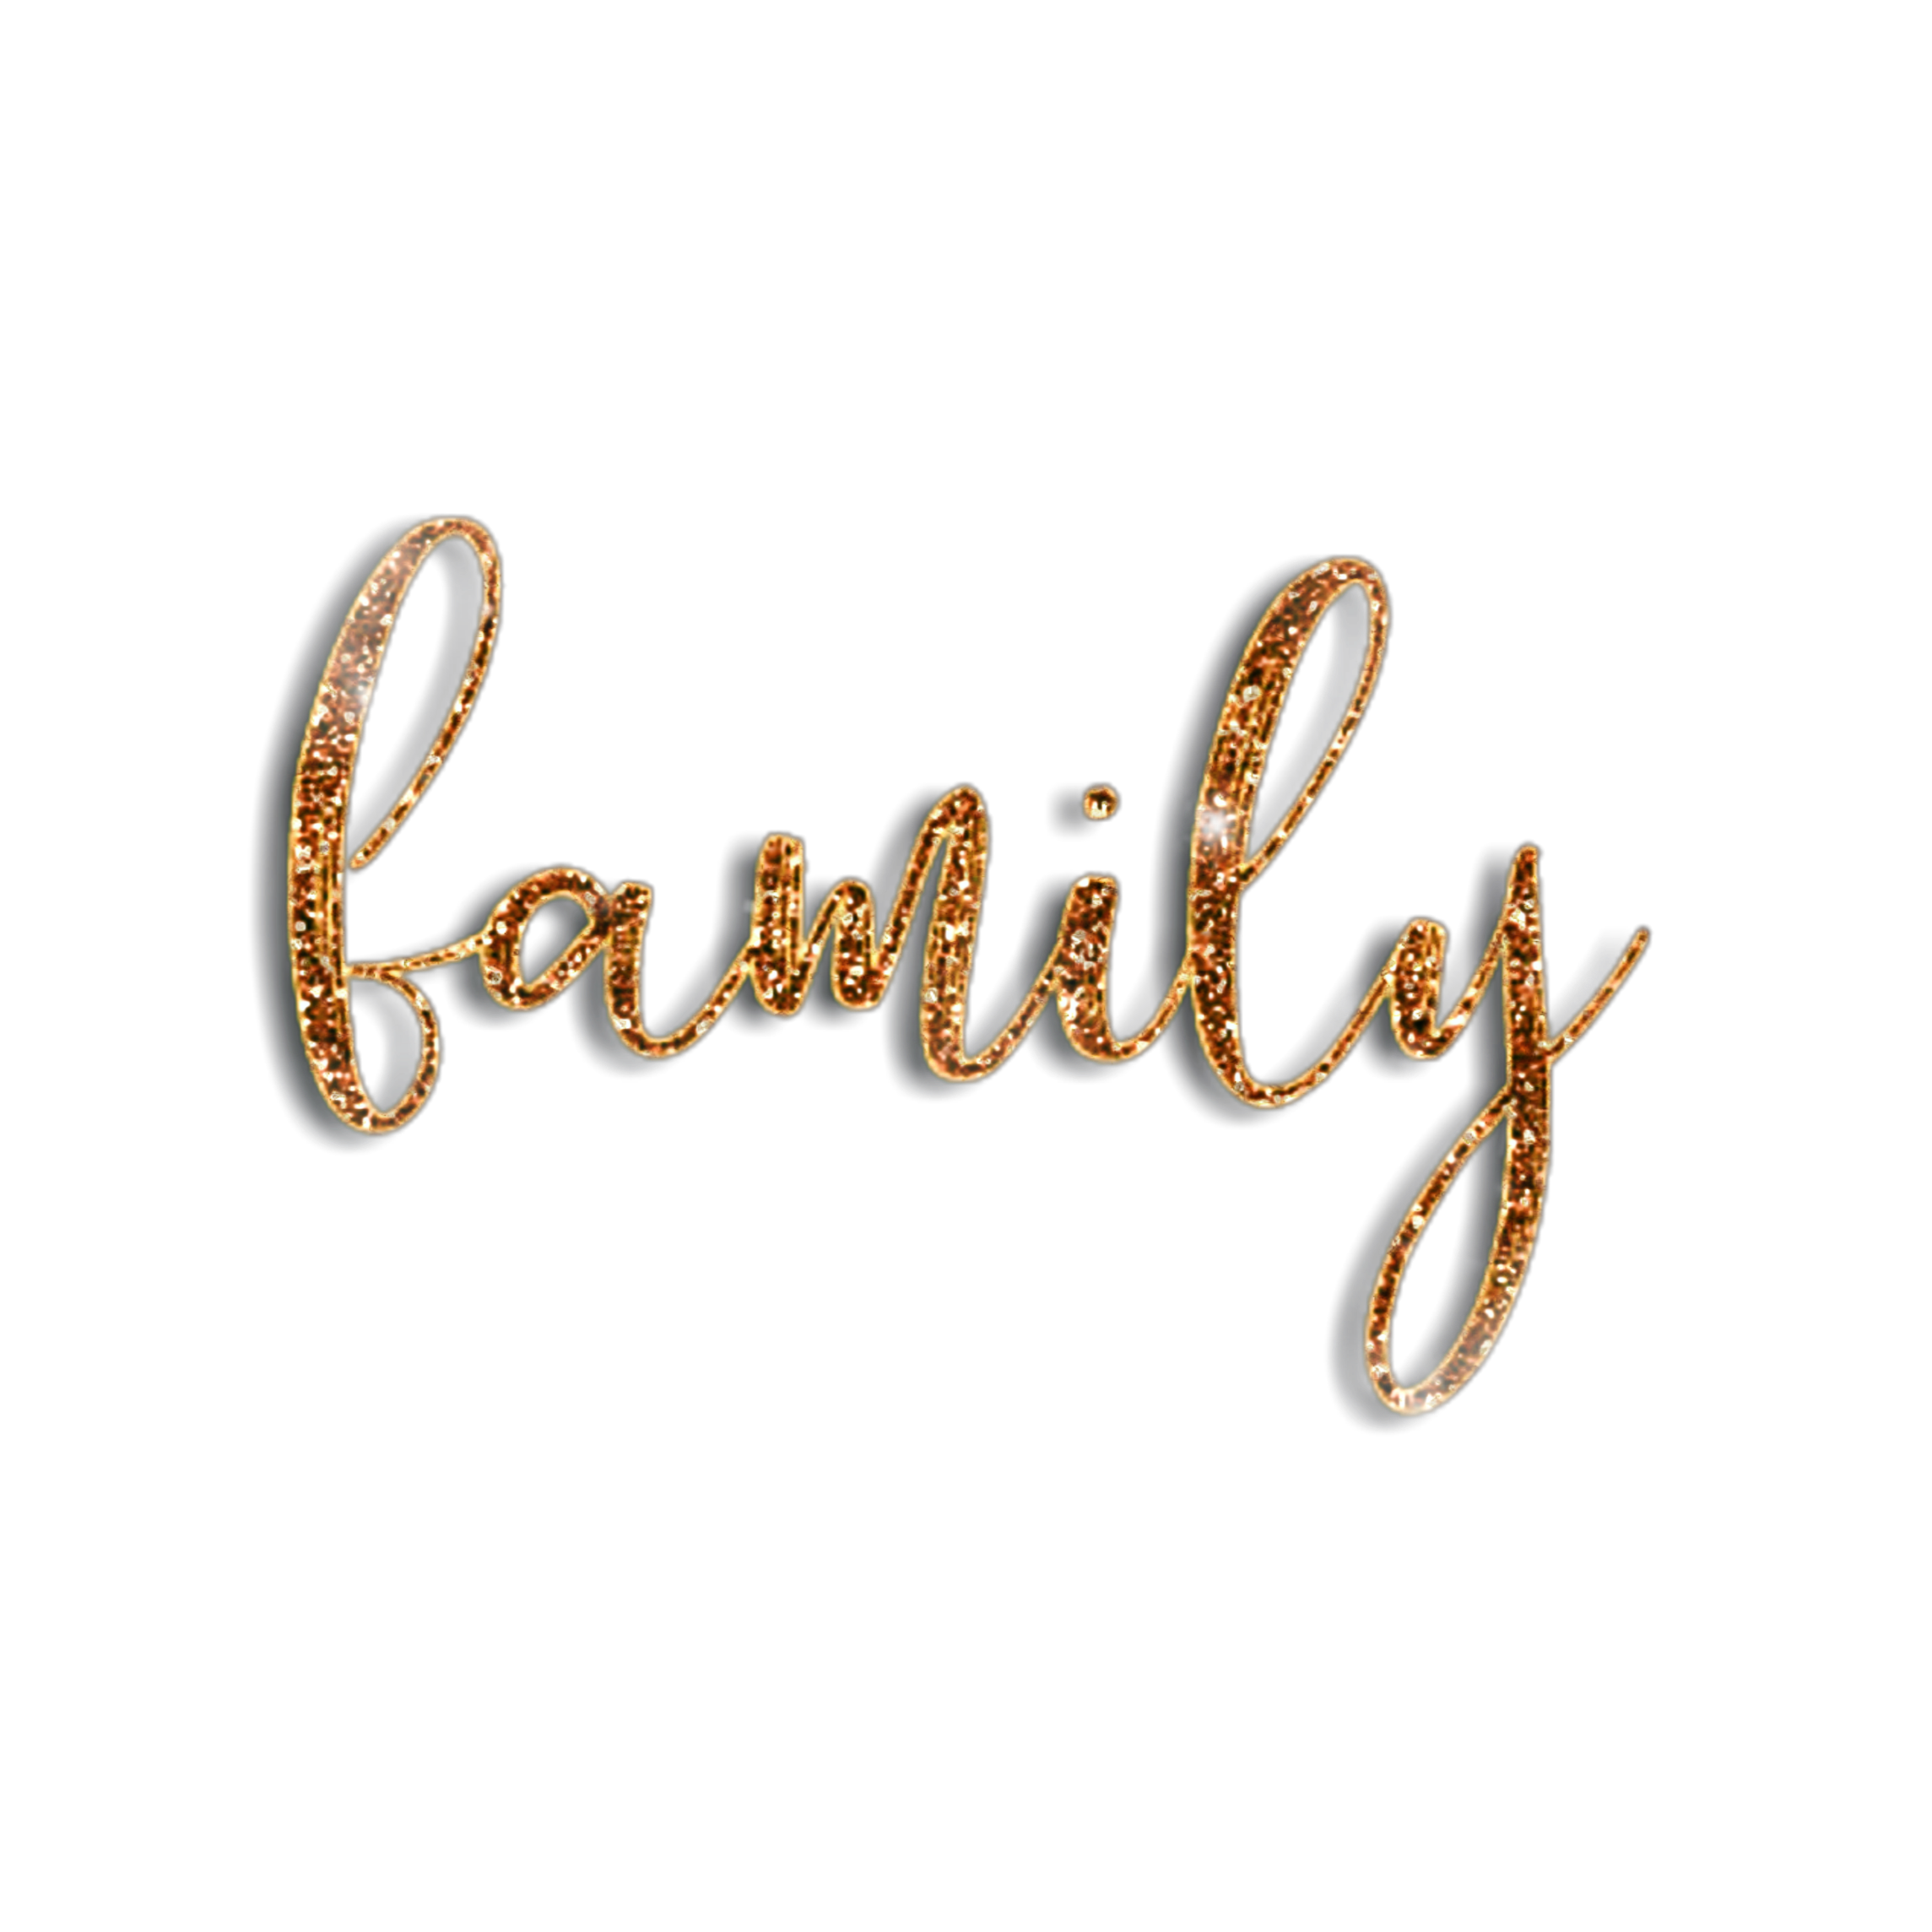 family-words-sayings-quotes-golden-sticker-by-jessicaknable